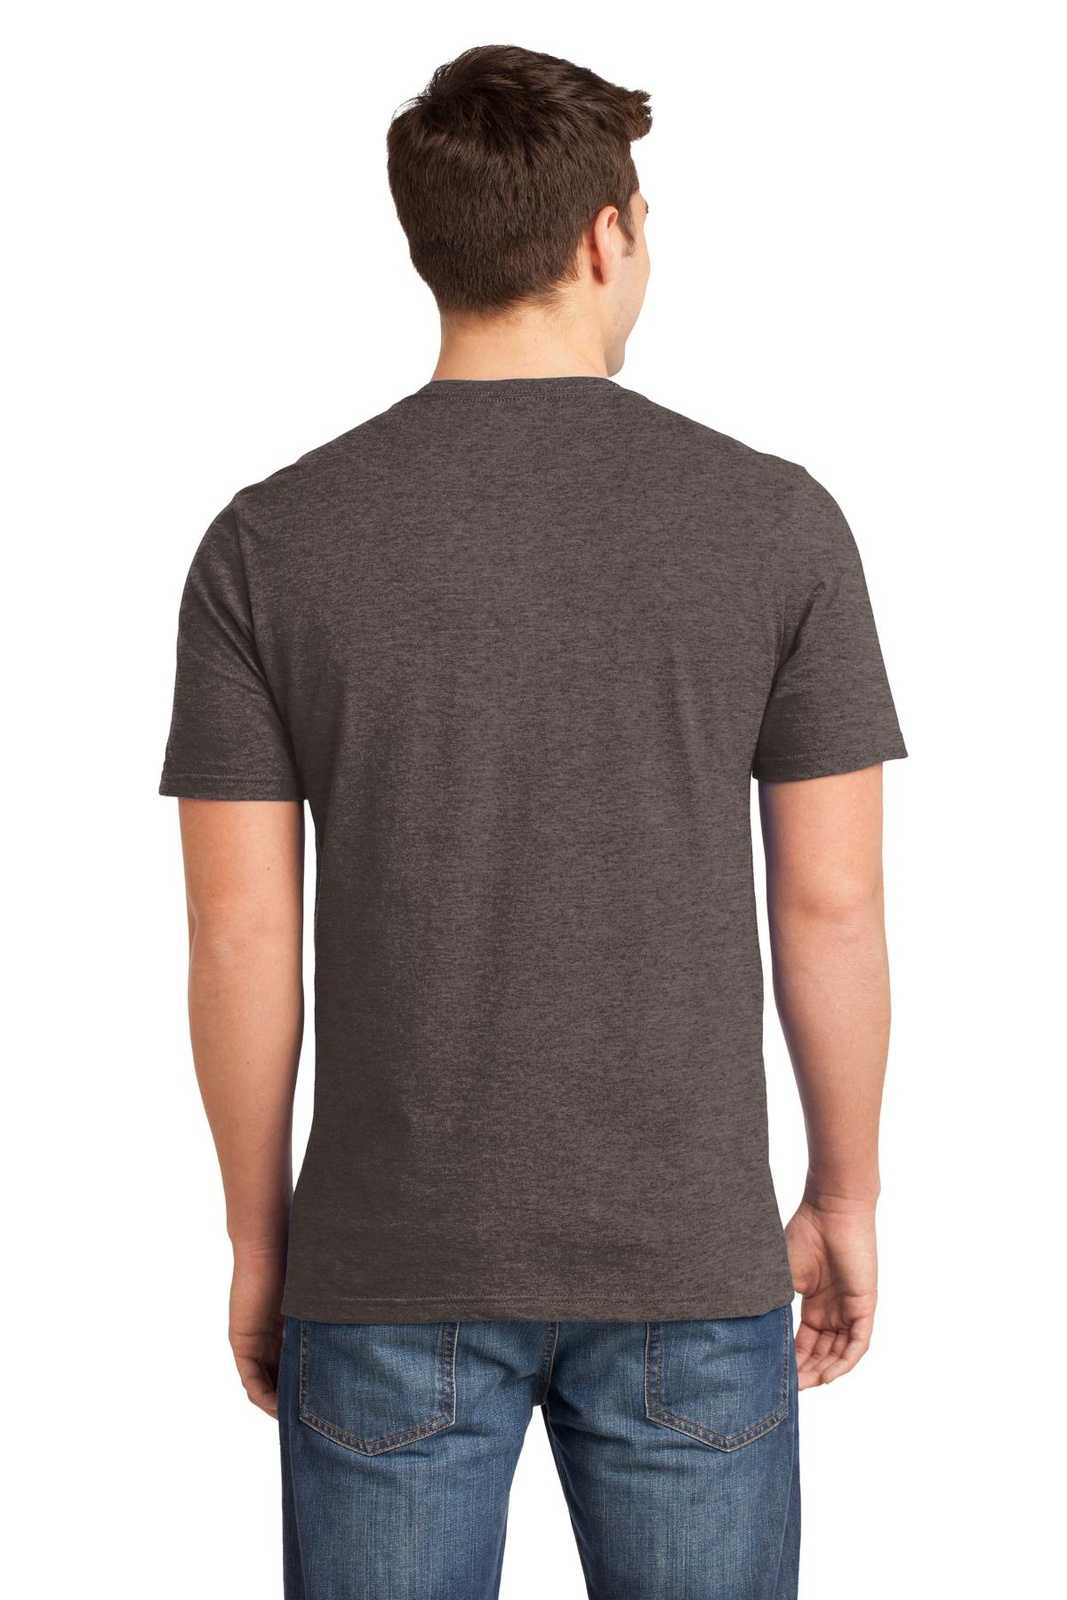 District DT6000 Very Important Tee - Heathered Brown - HIT a Double - 1